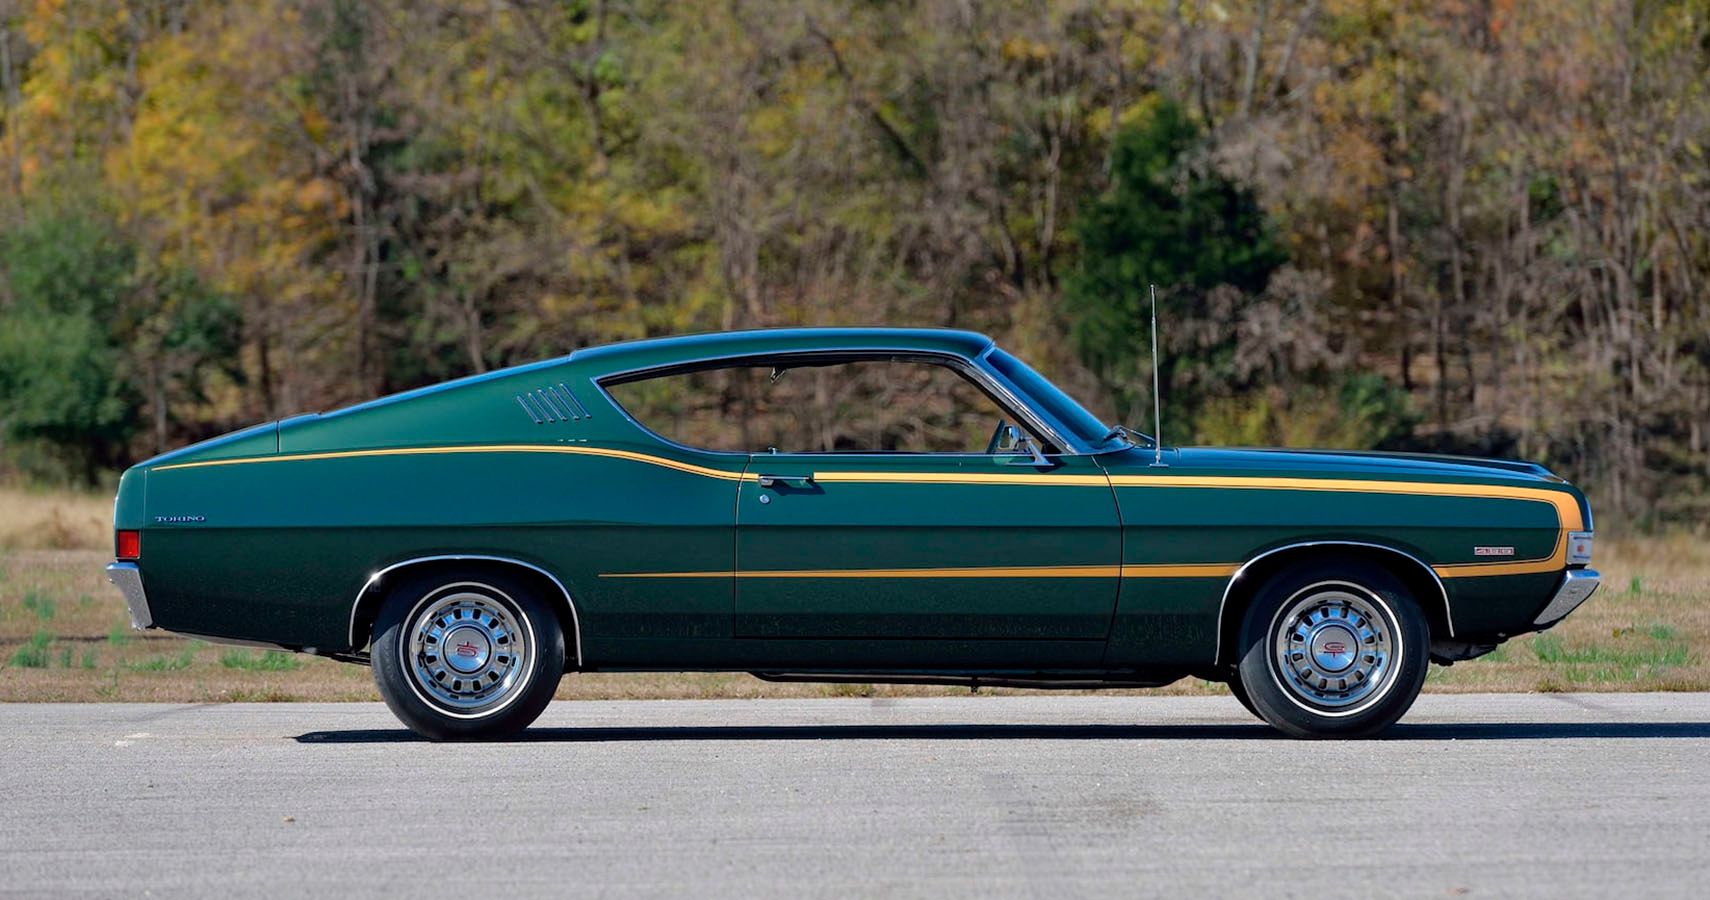 For A Ford Torino GT, Expect To Cough Up An Easy $20,000-Plus, And Hagerty Places The Average Value Of A 1968 Ford Torino GT At Under $30,000